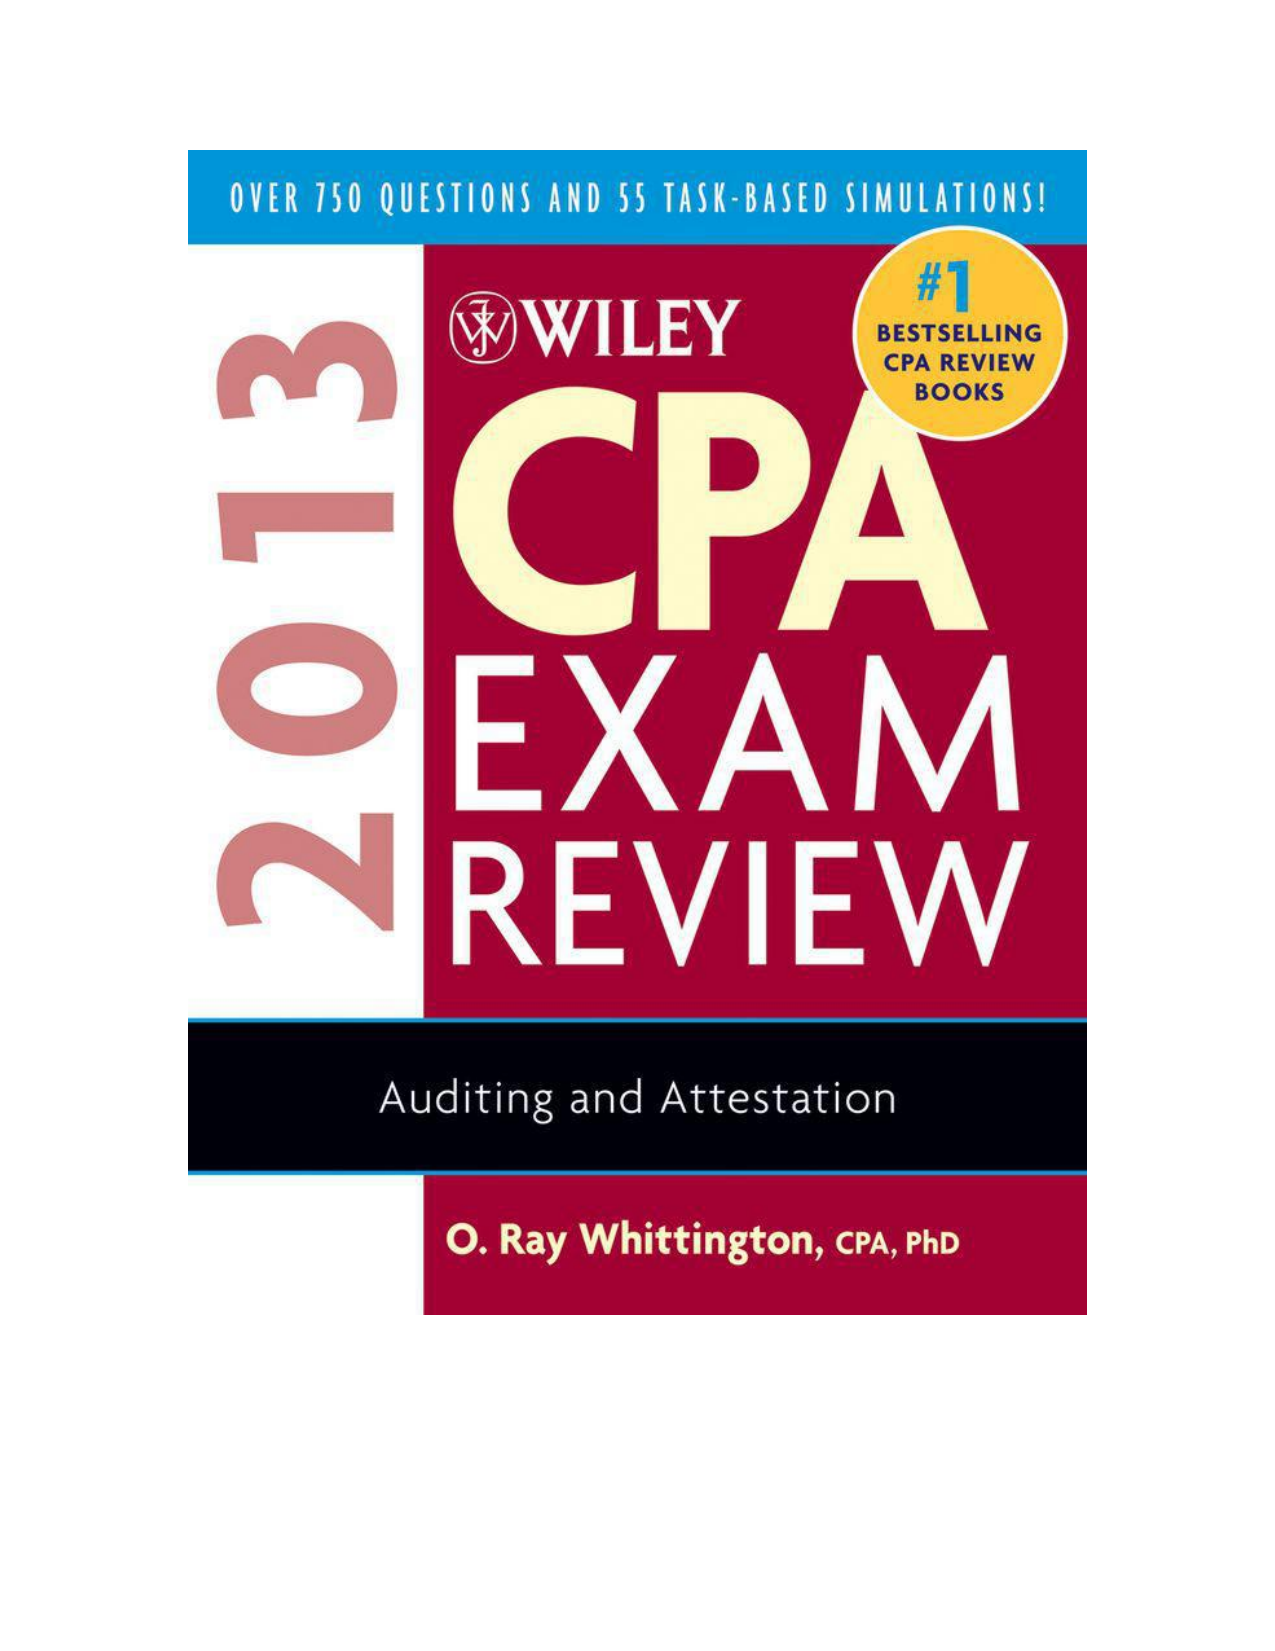 wiley cpa exam review for college credit